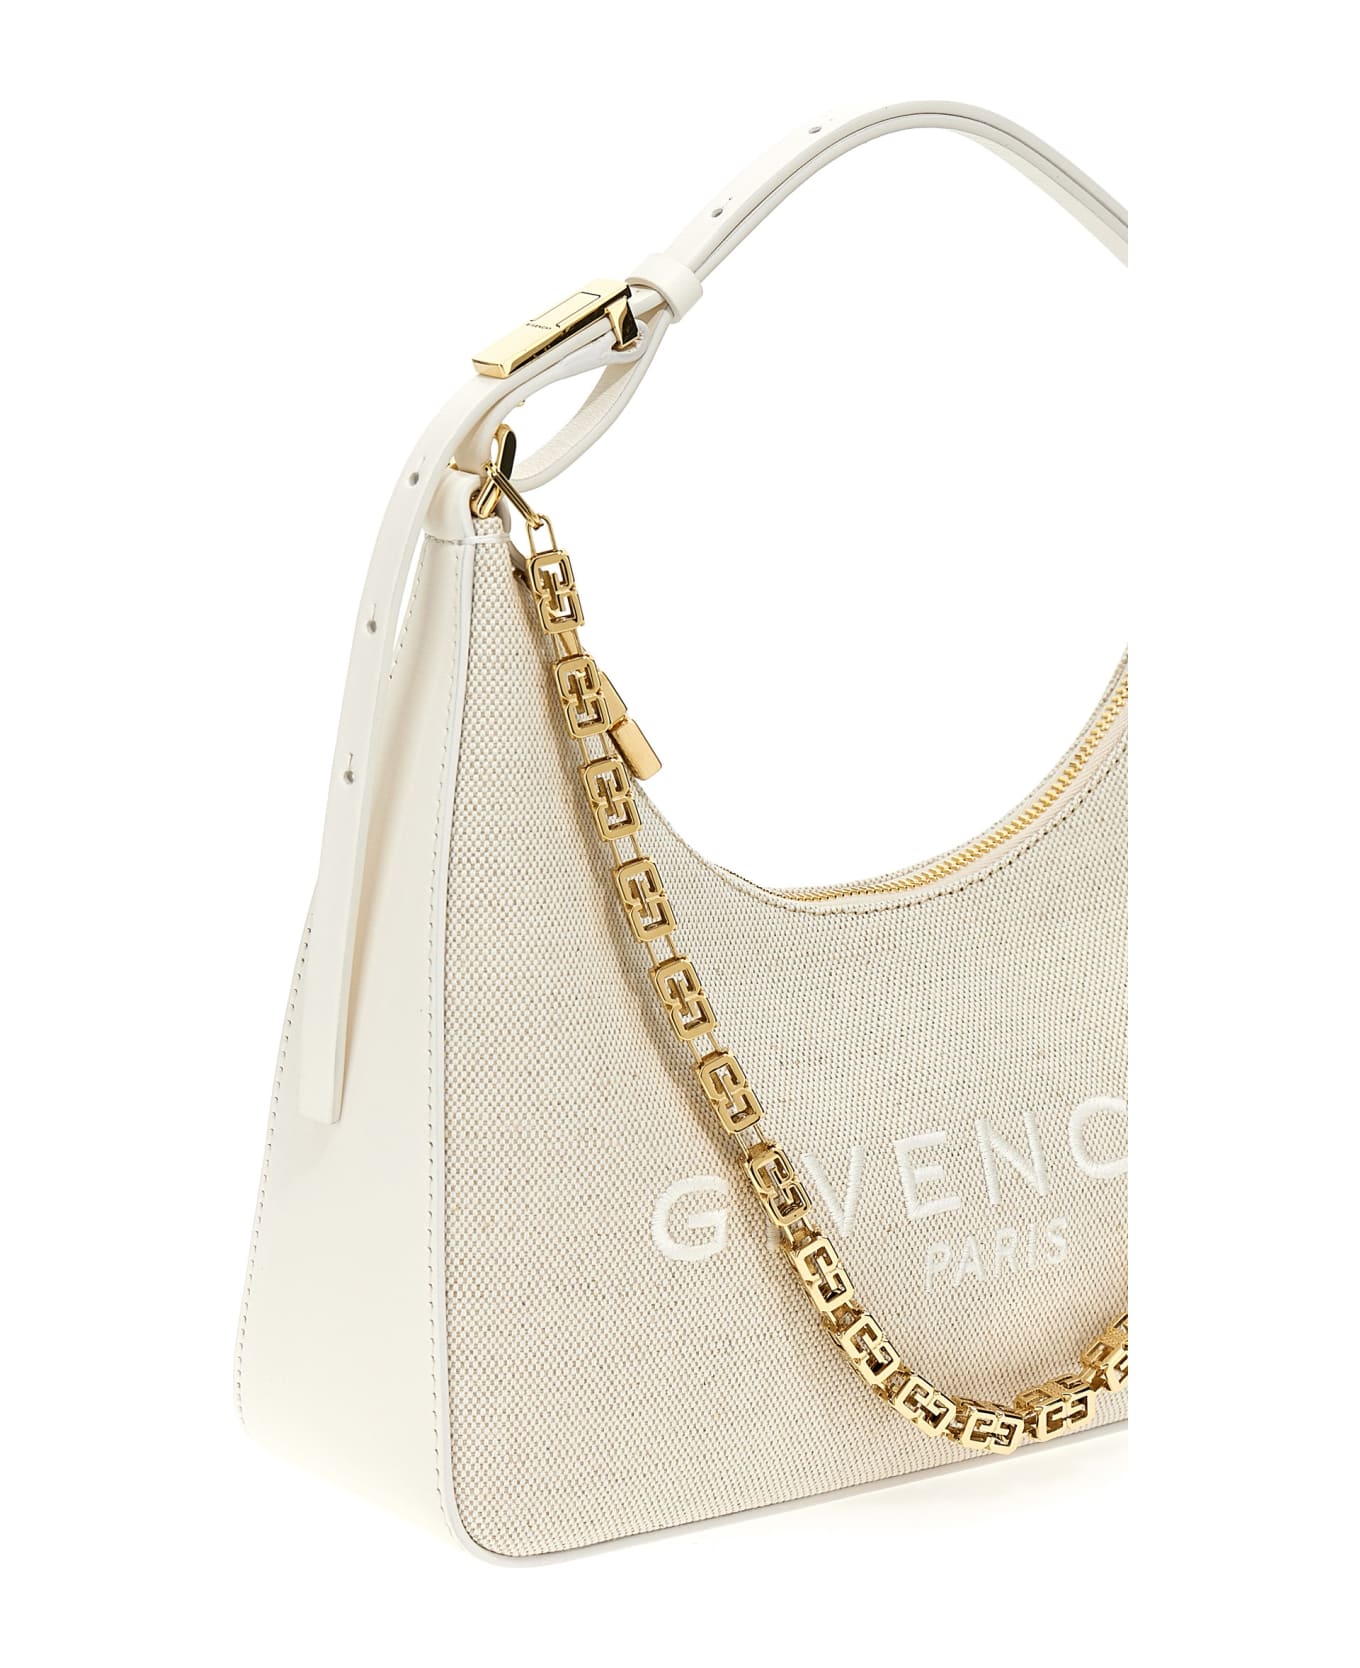 Givenchy Moon Cut Out Small Shoulder Bag - Beige トートバッグ